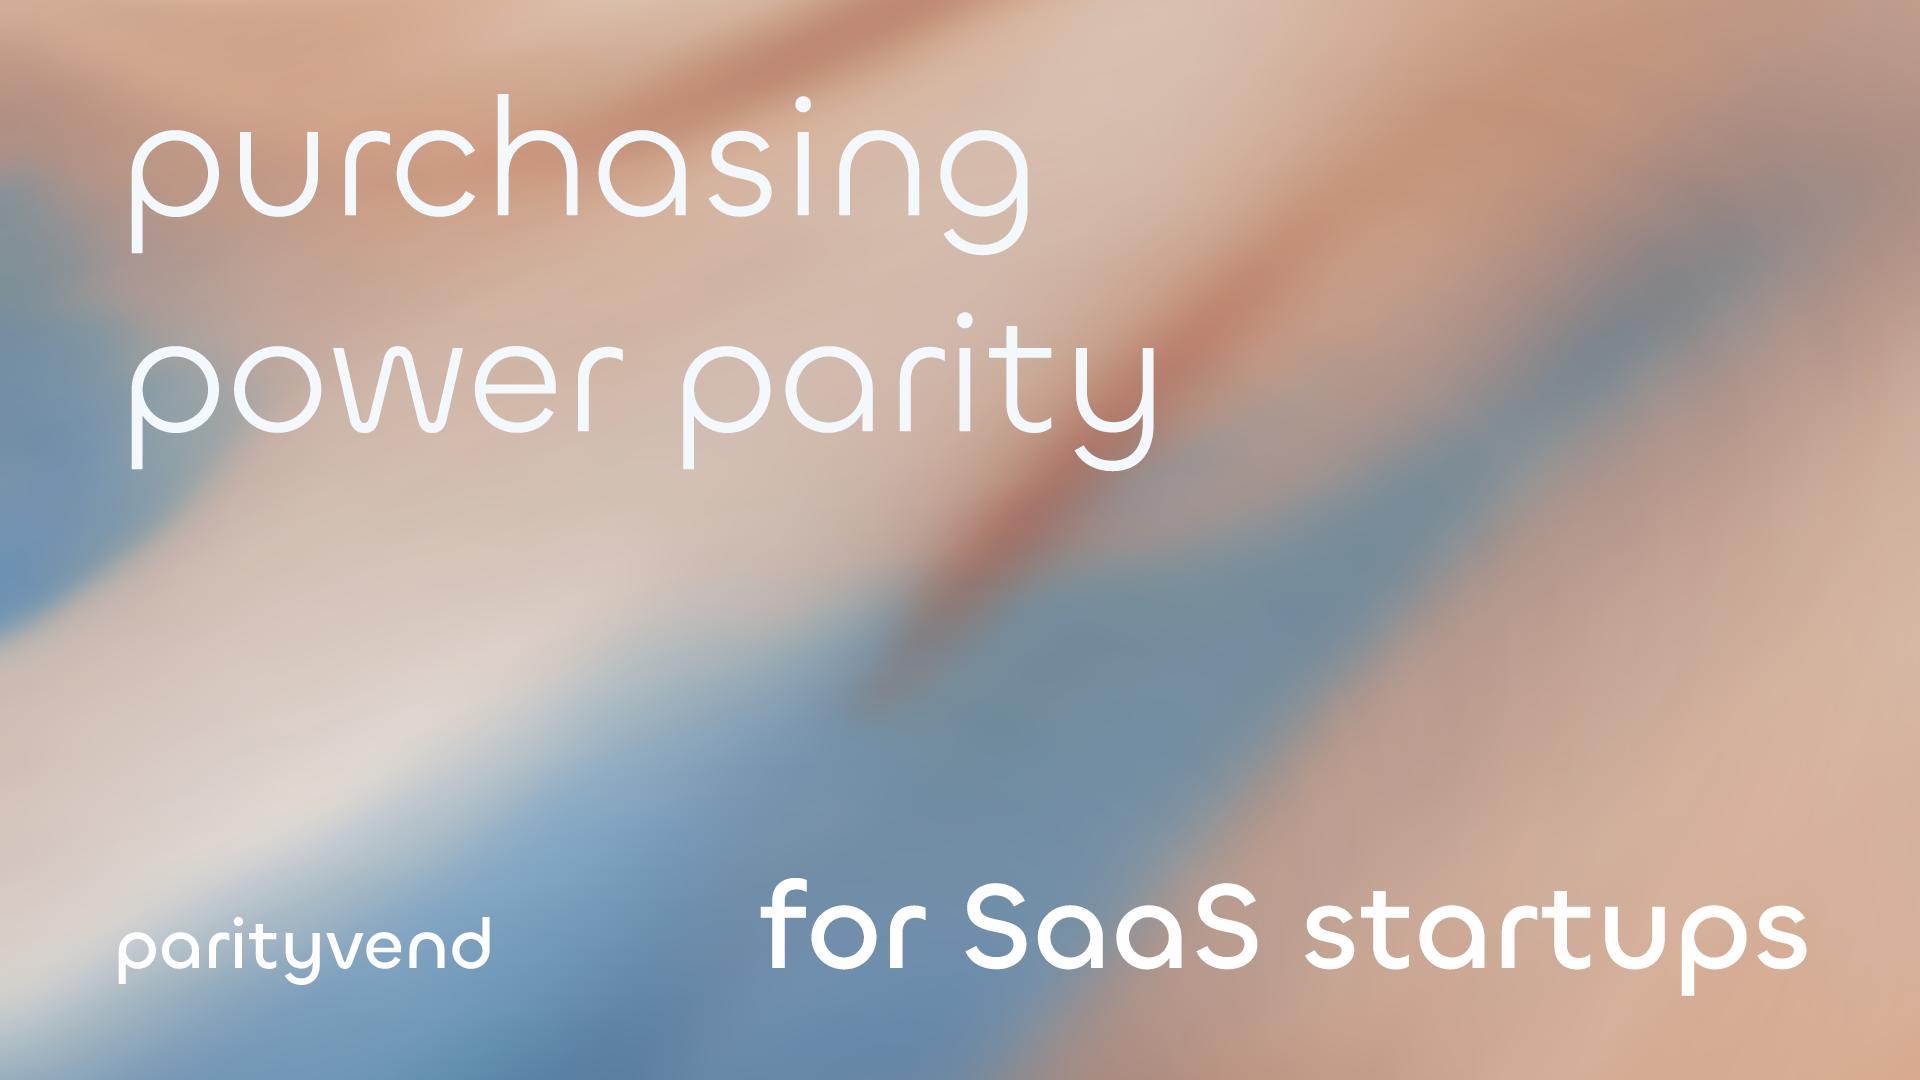 ParityVend: Using Purchasing Power Parity for SaaS Startups